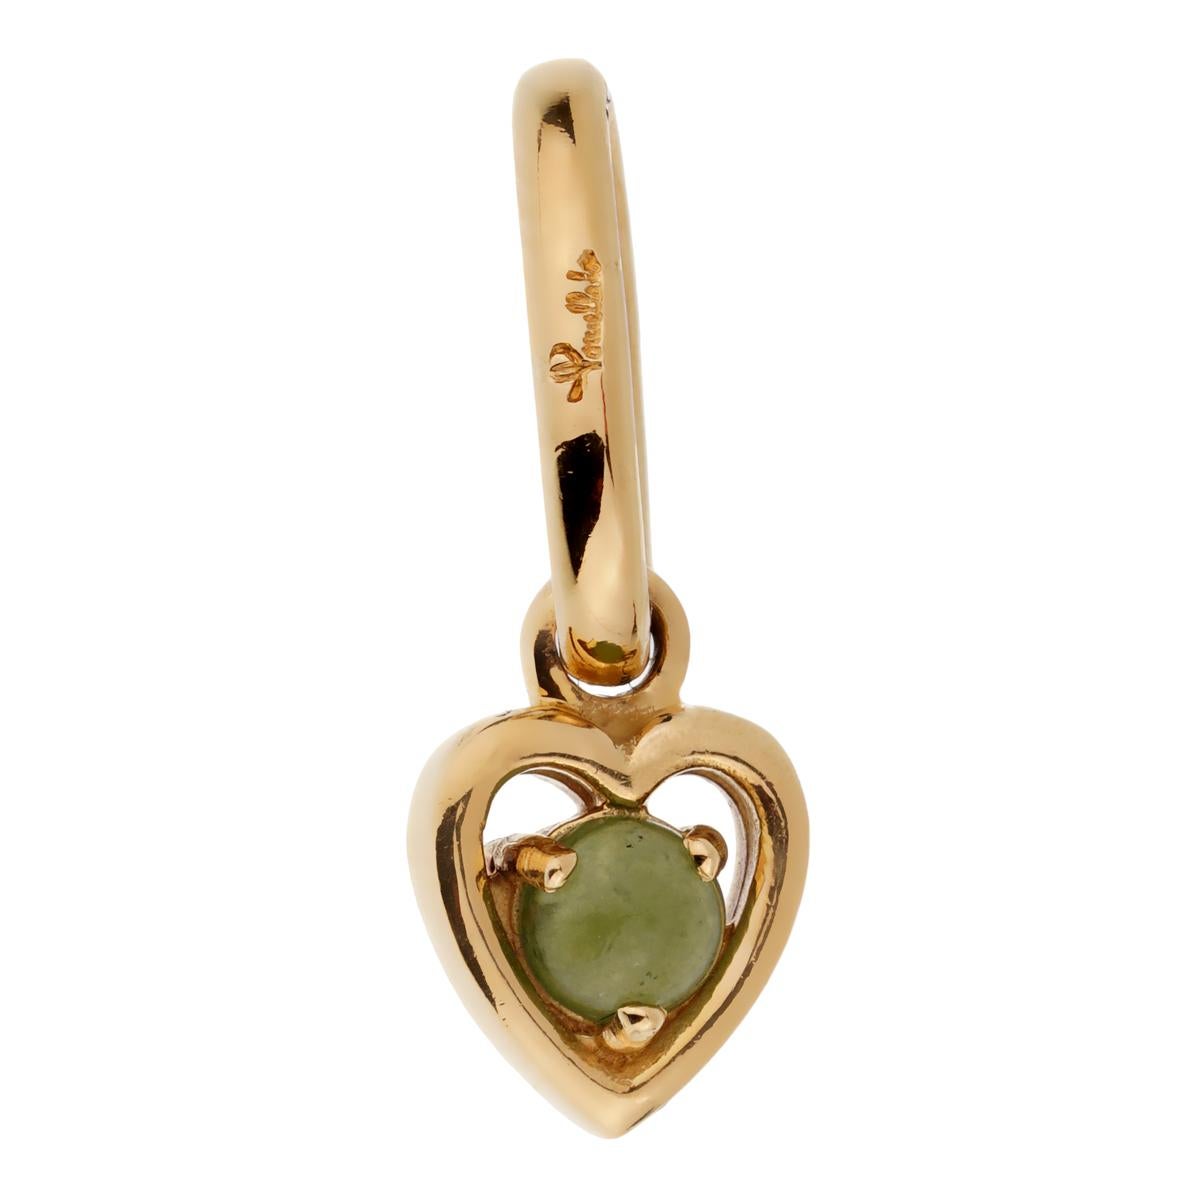 A chic brand new Pomellato charm pendant featuring a .35ct Green Chalcedony set in 18k yellow gold. 

Sku: 2304